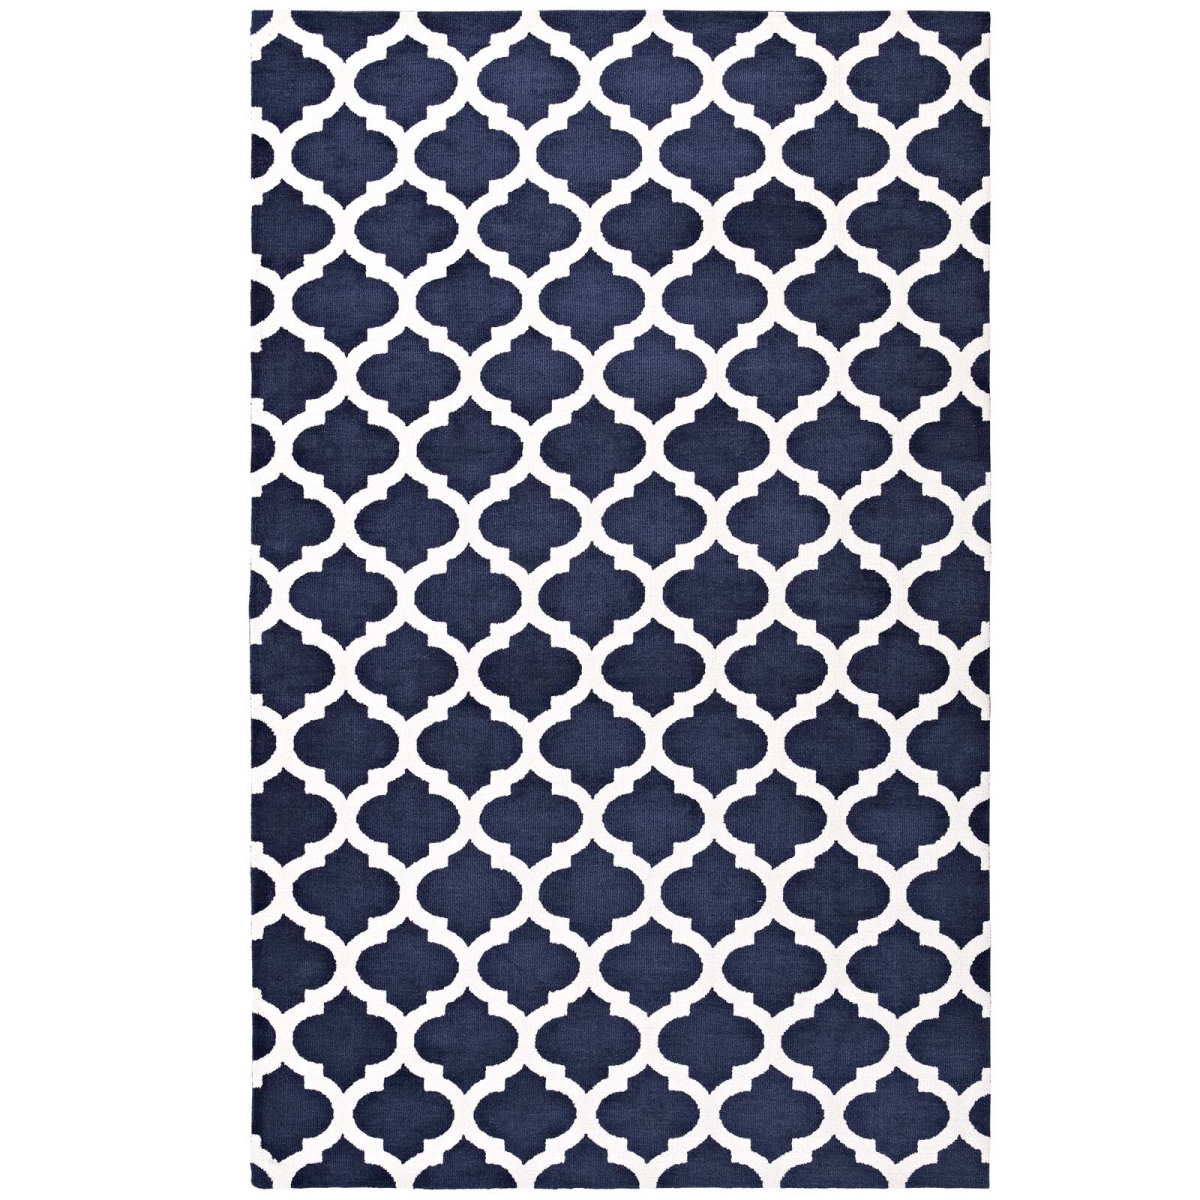 R-1001a-810 8 X 10 Ft. Lida Moroccan Trellis Polyester Area Rug - Navy & Ivory, 0.5 X 96 X 120 In.